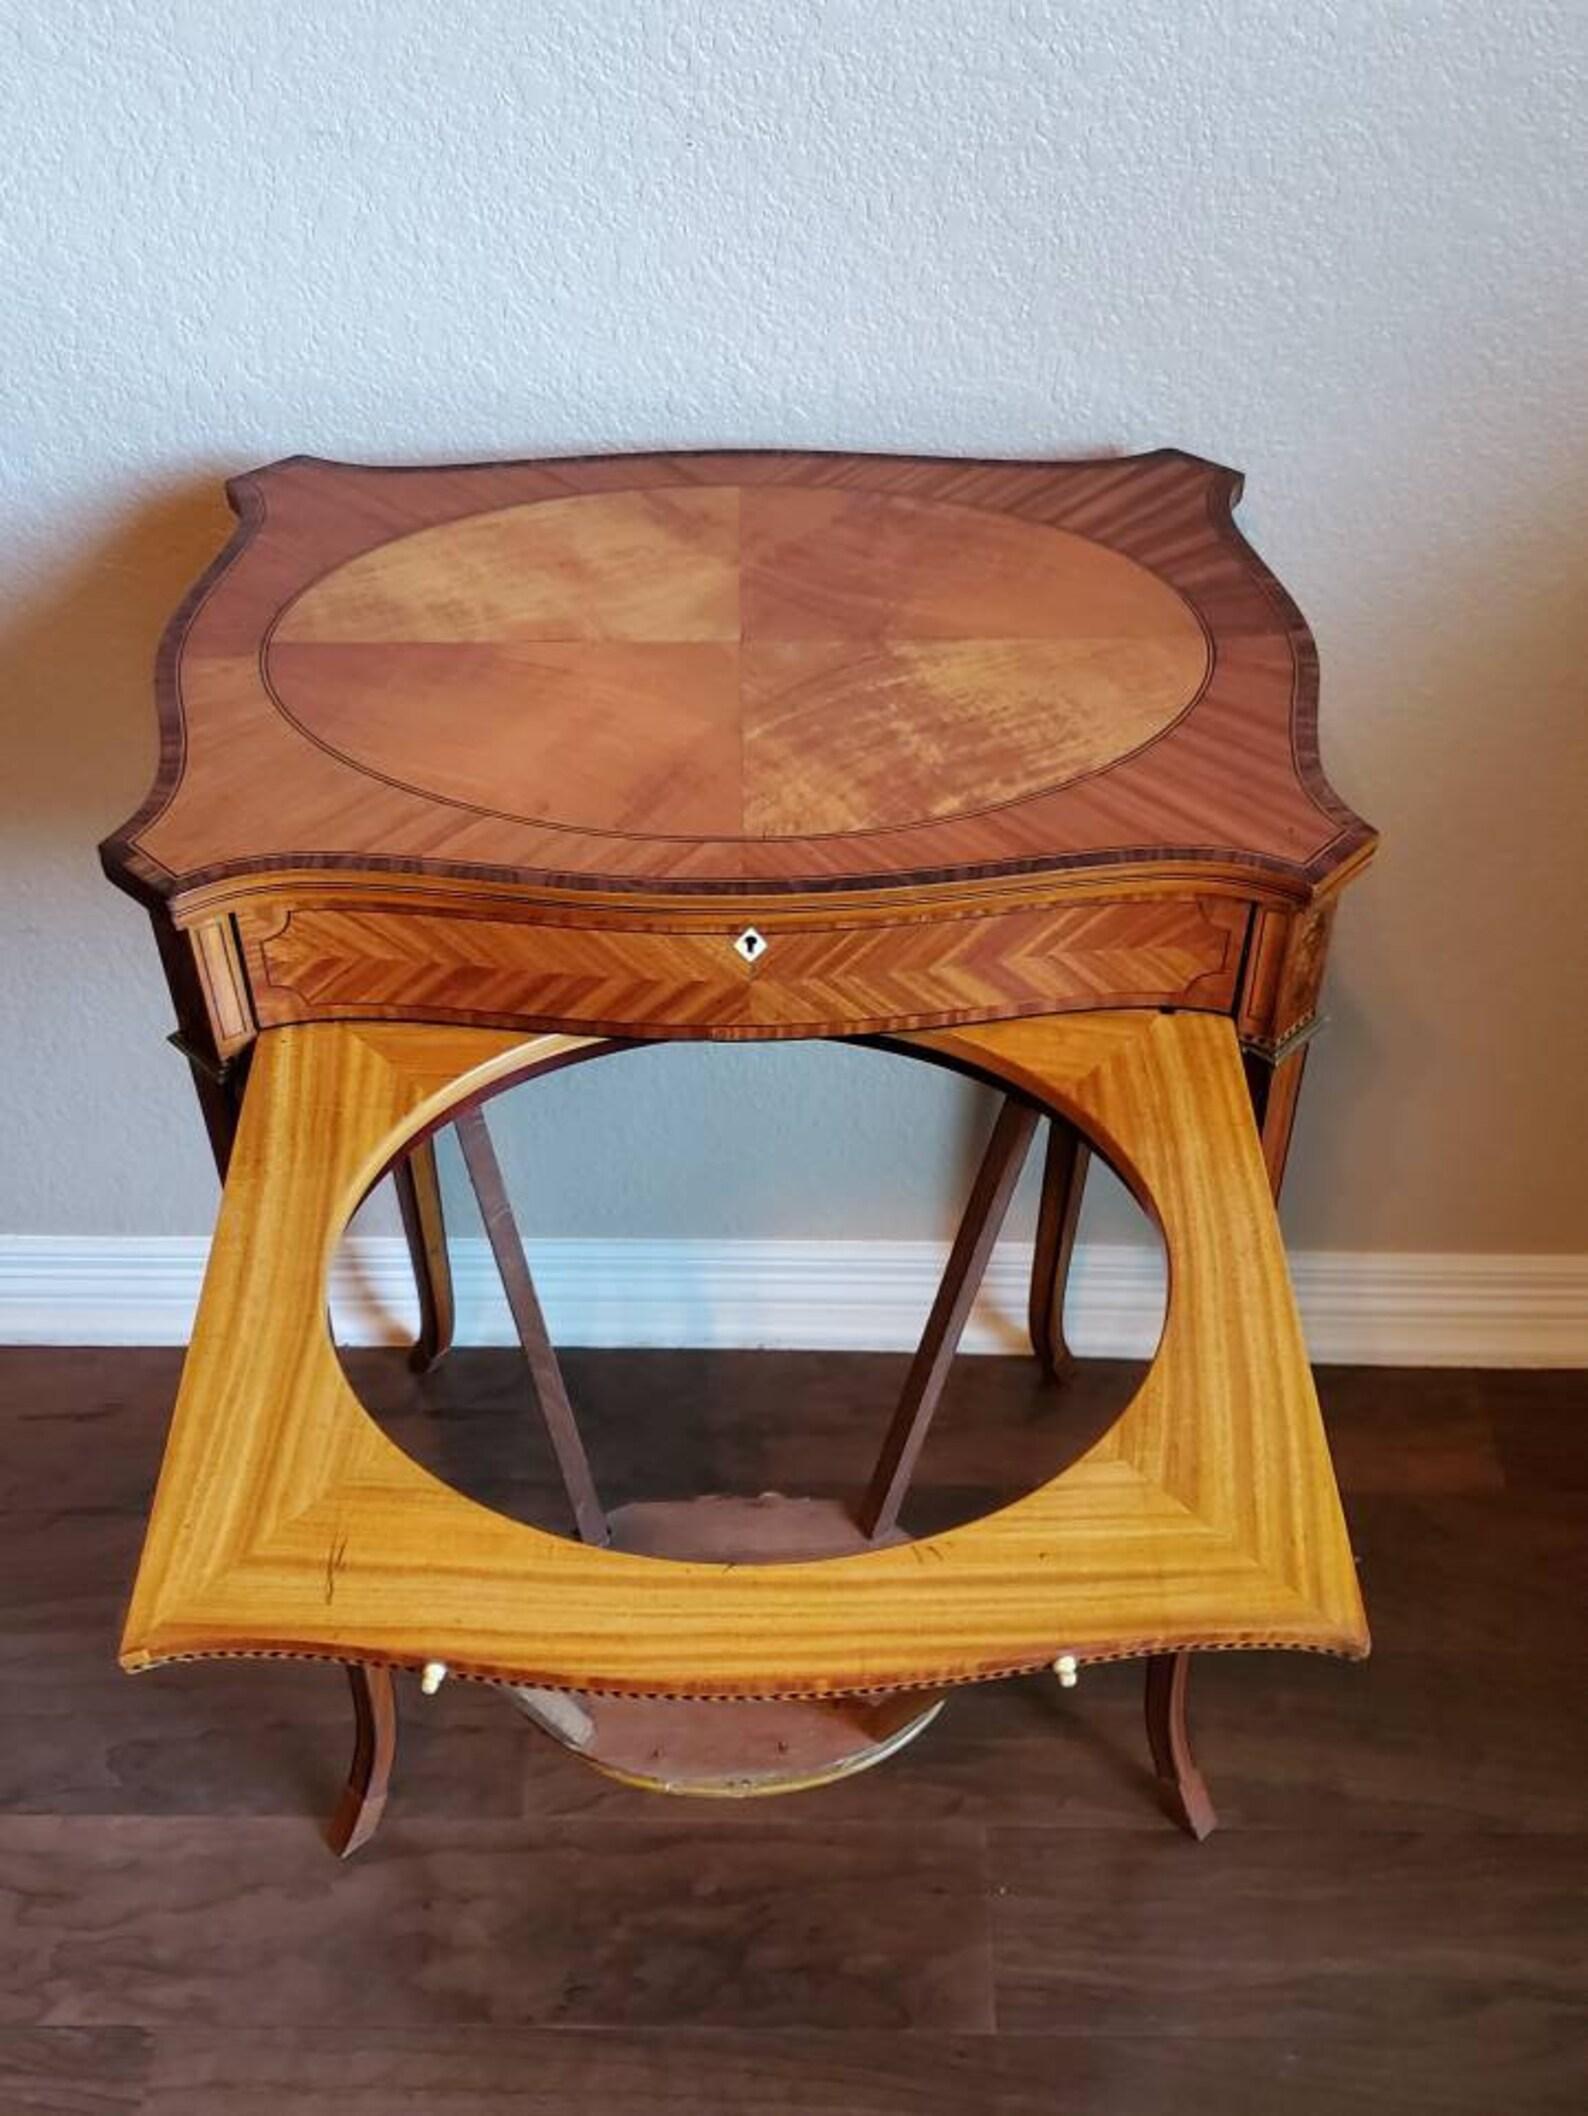 20th Century Antique English Edwardian Marquetry Inlaid Sewing Table For Sale